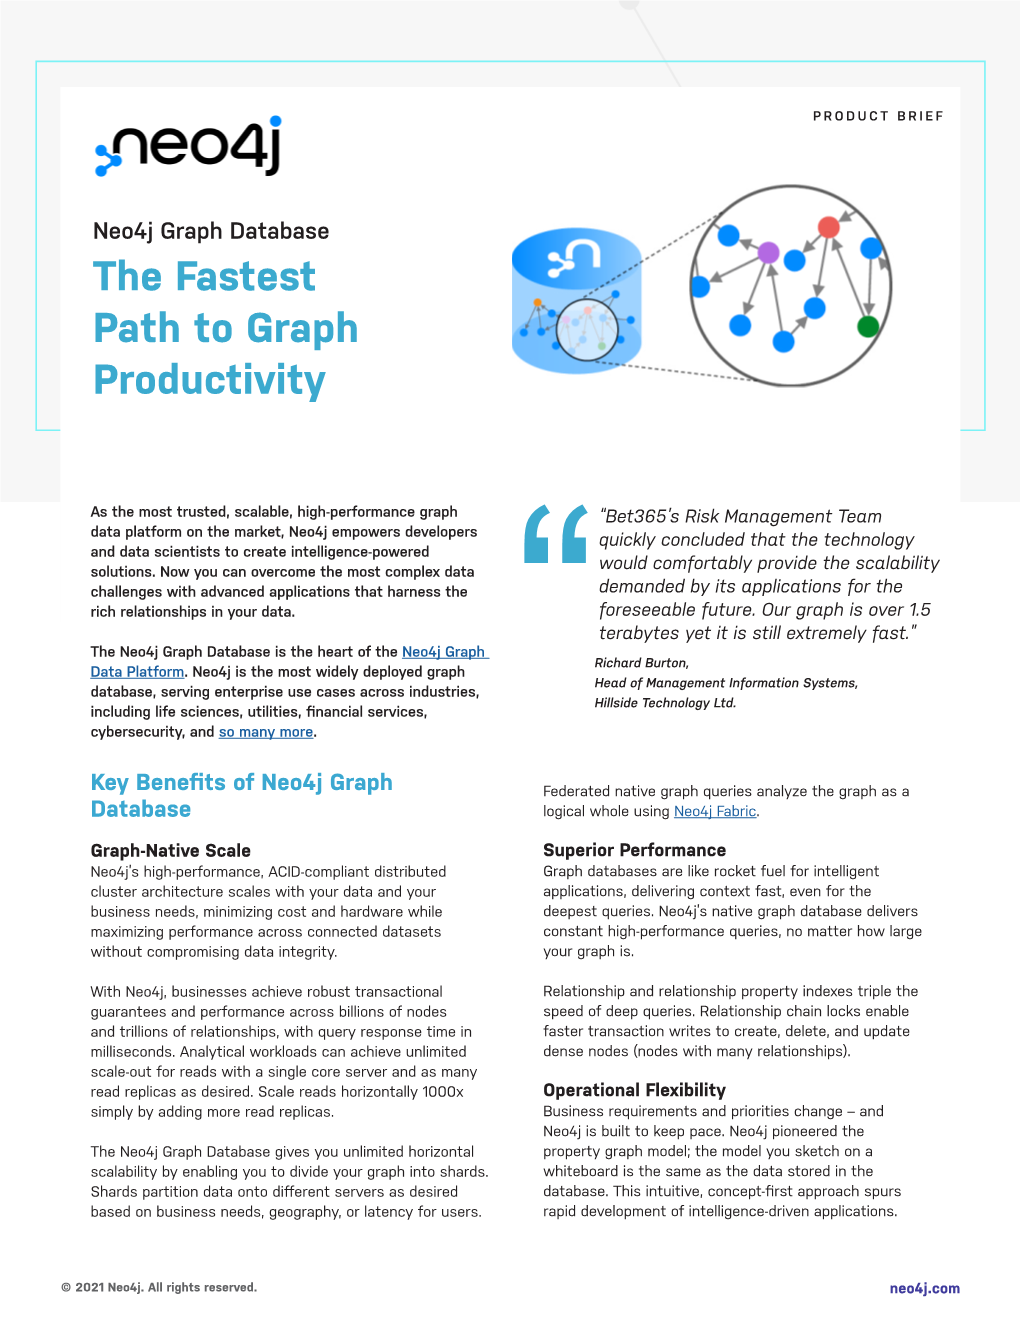 The Fastest Path to Graph Productivity